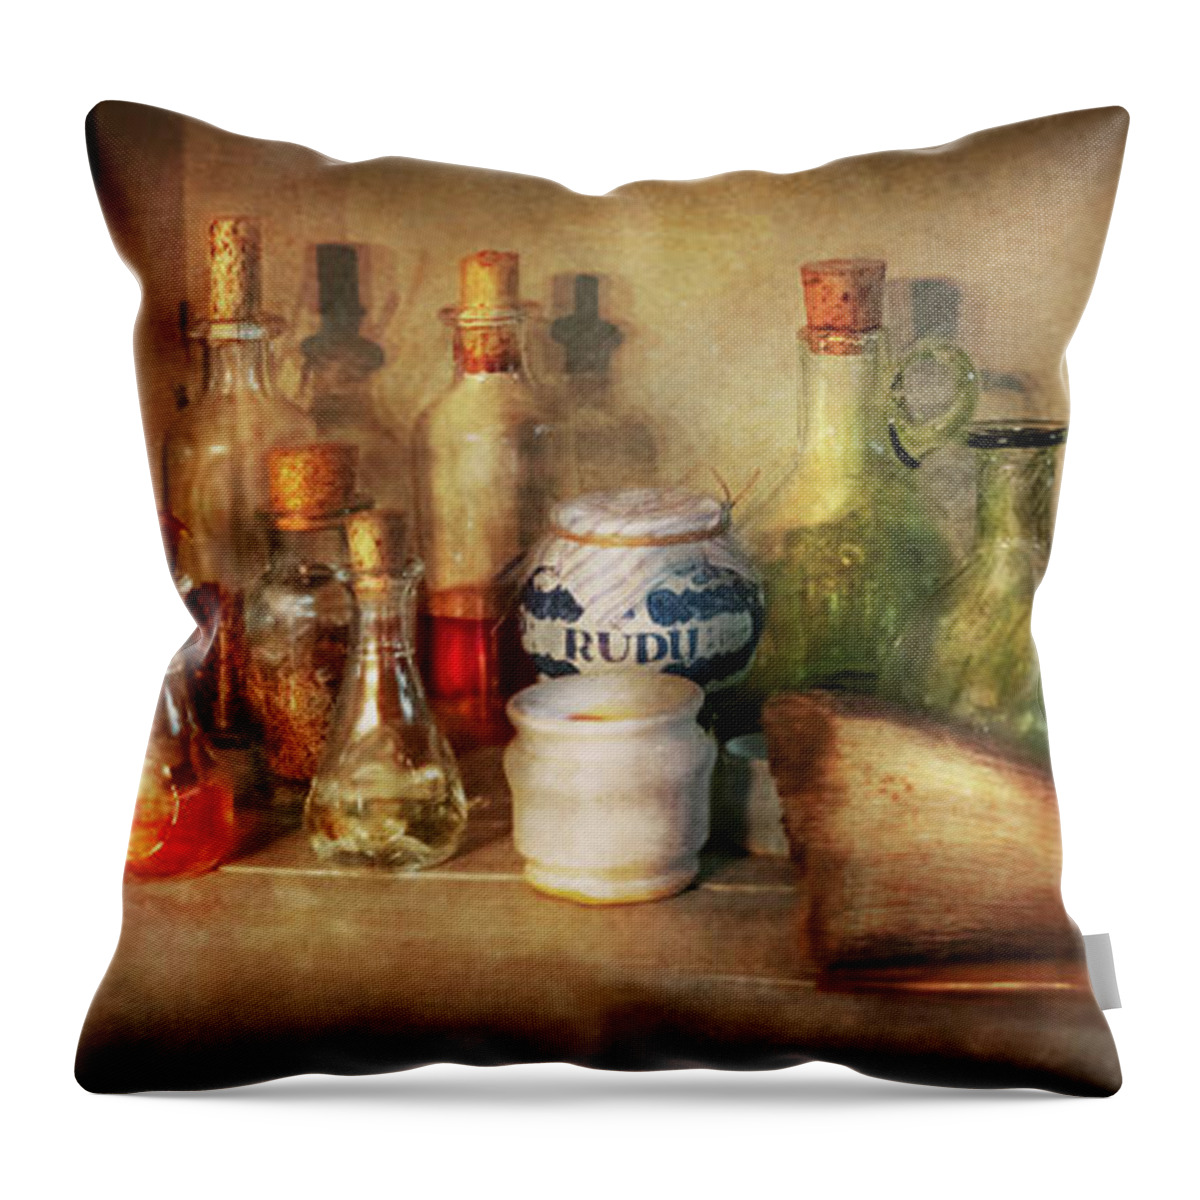 Pharmacist Throw Pillow featuring the photograph Alchemy - The home alchemist by Mike Savad